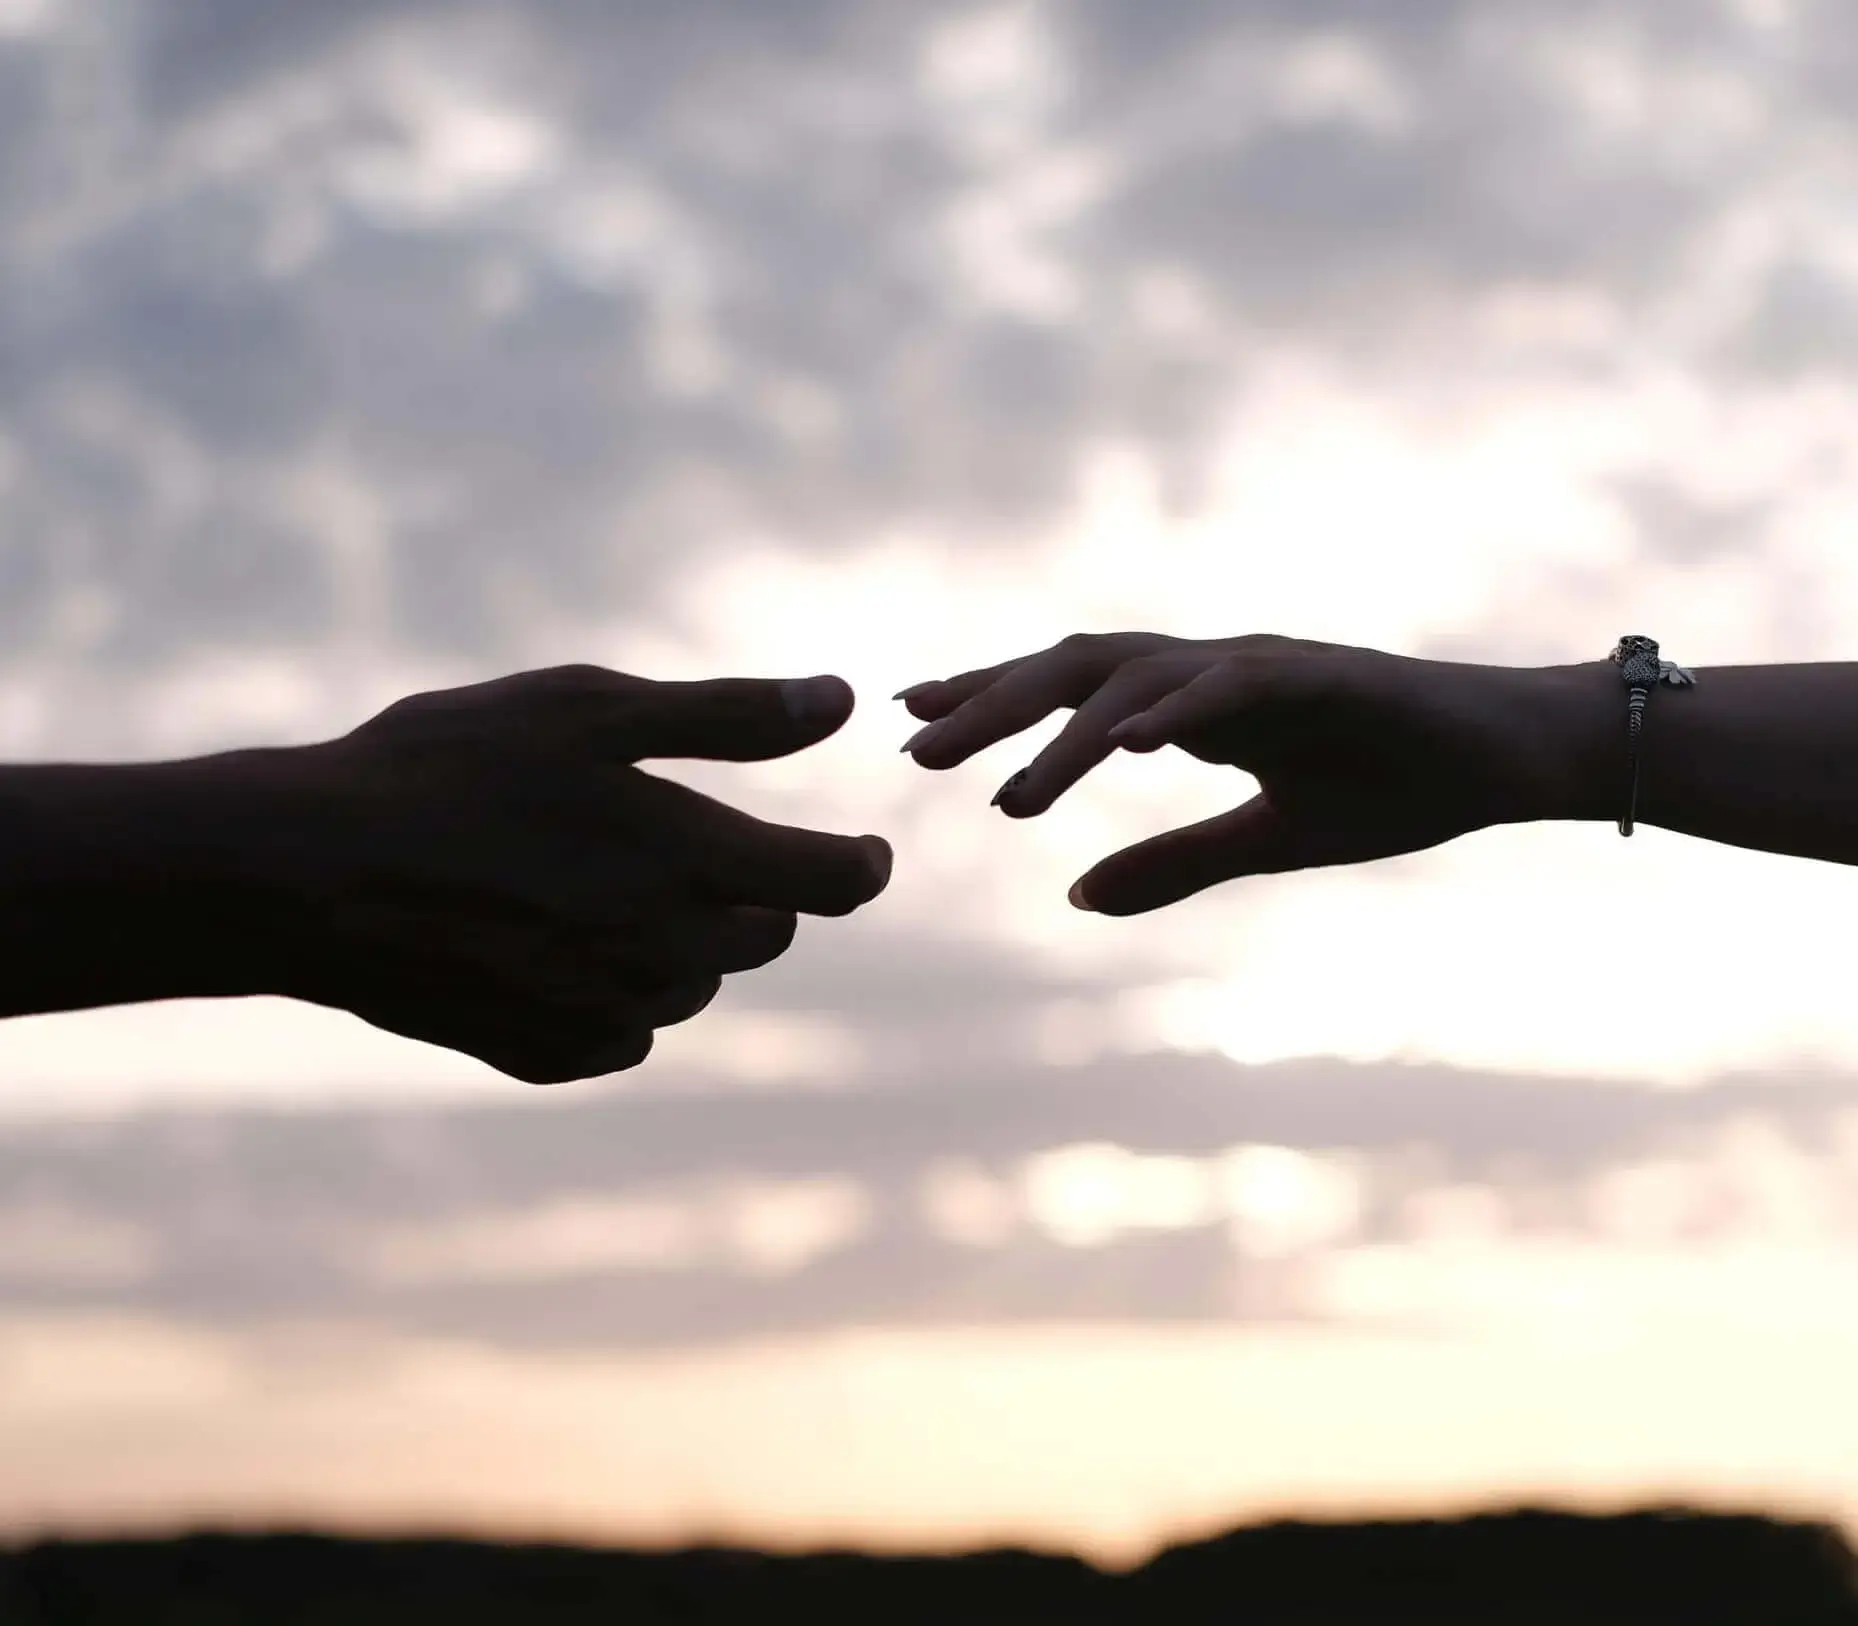 Silhouettes of two hands reaching for each other, backlit by a rising sun.